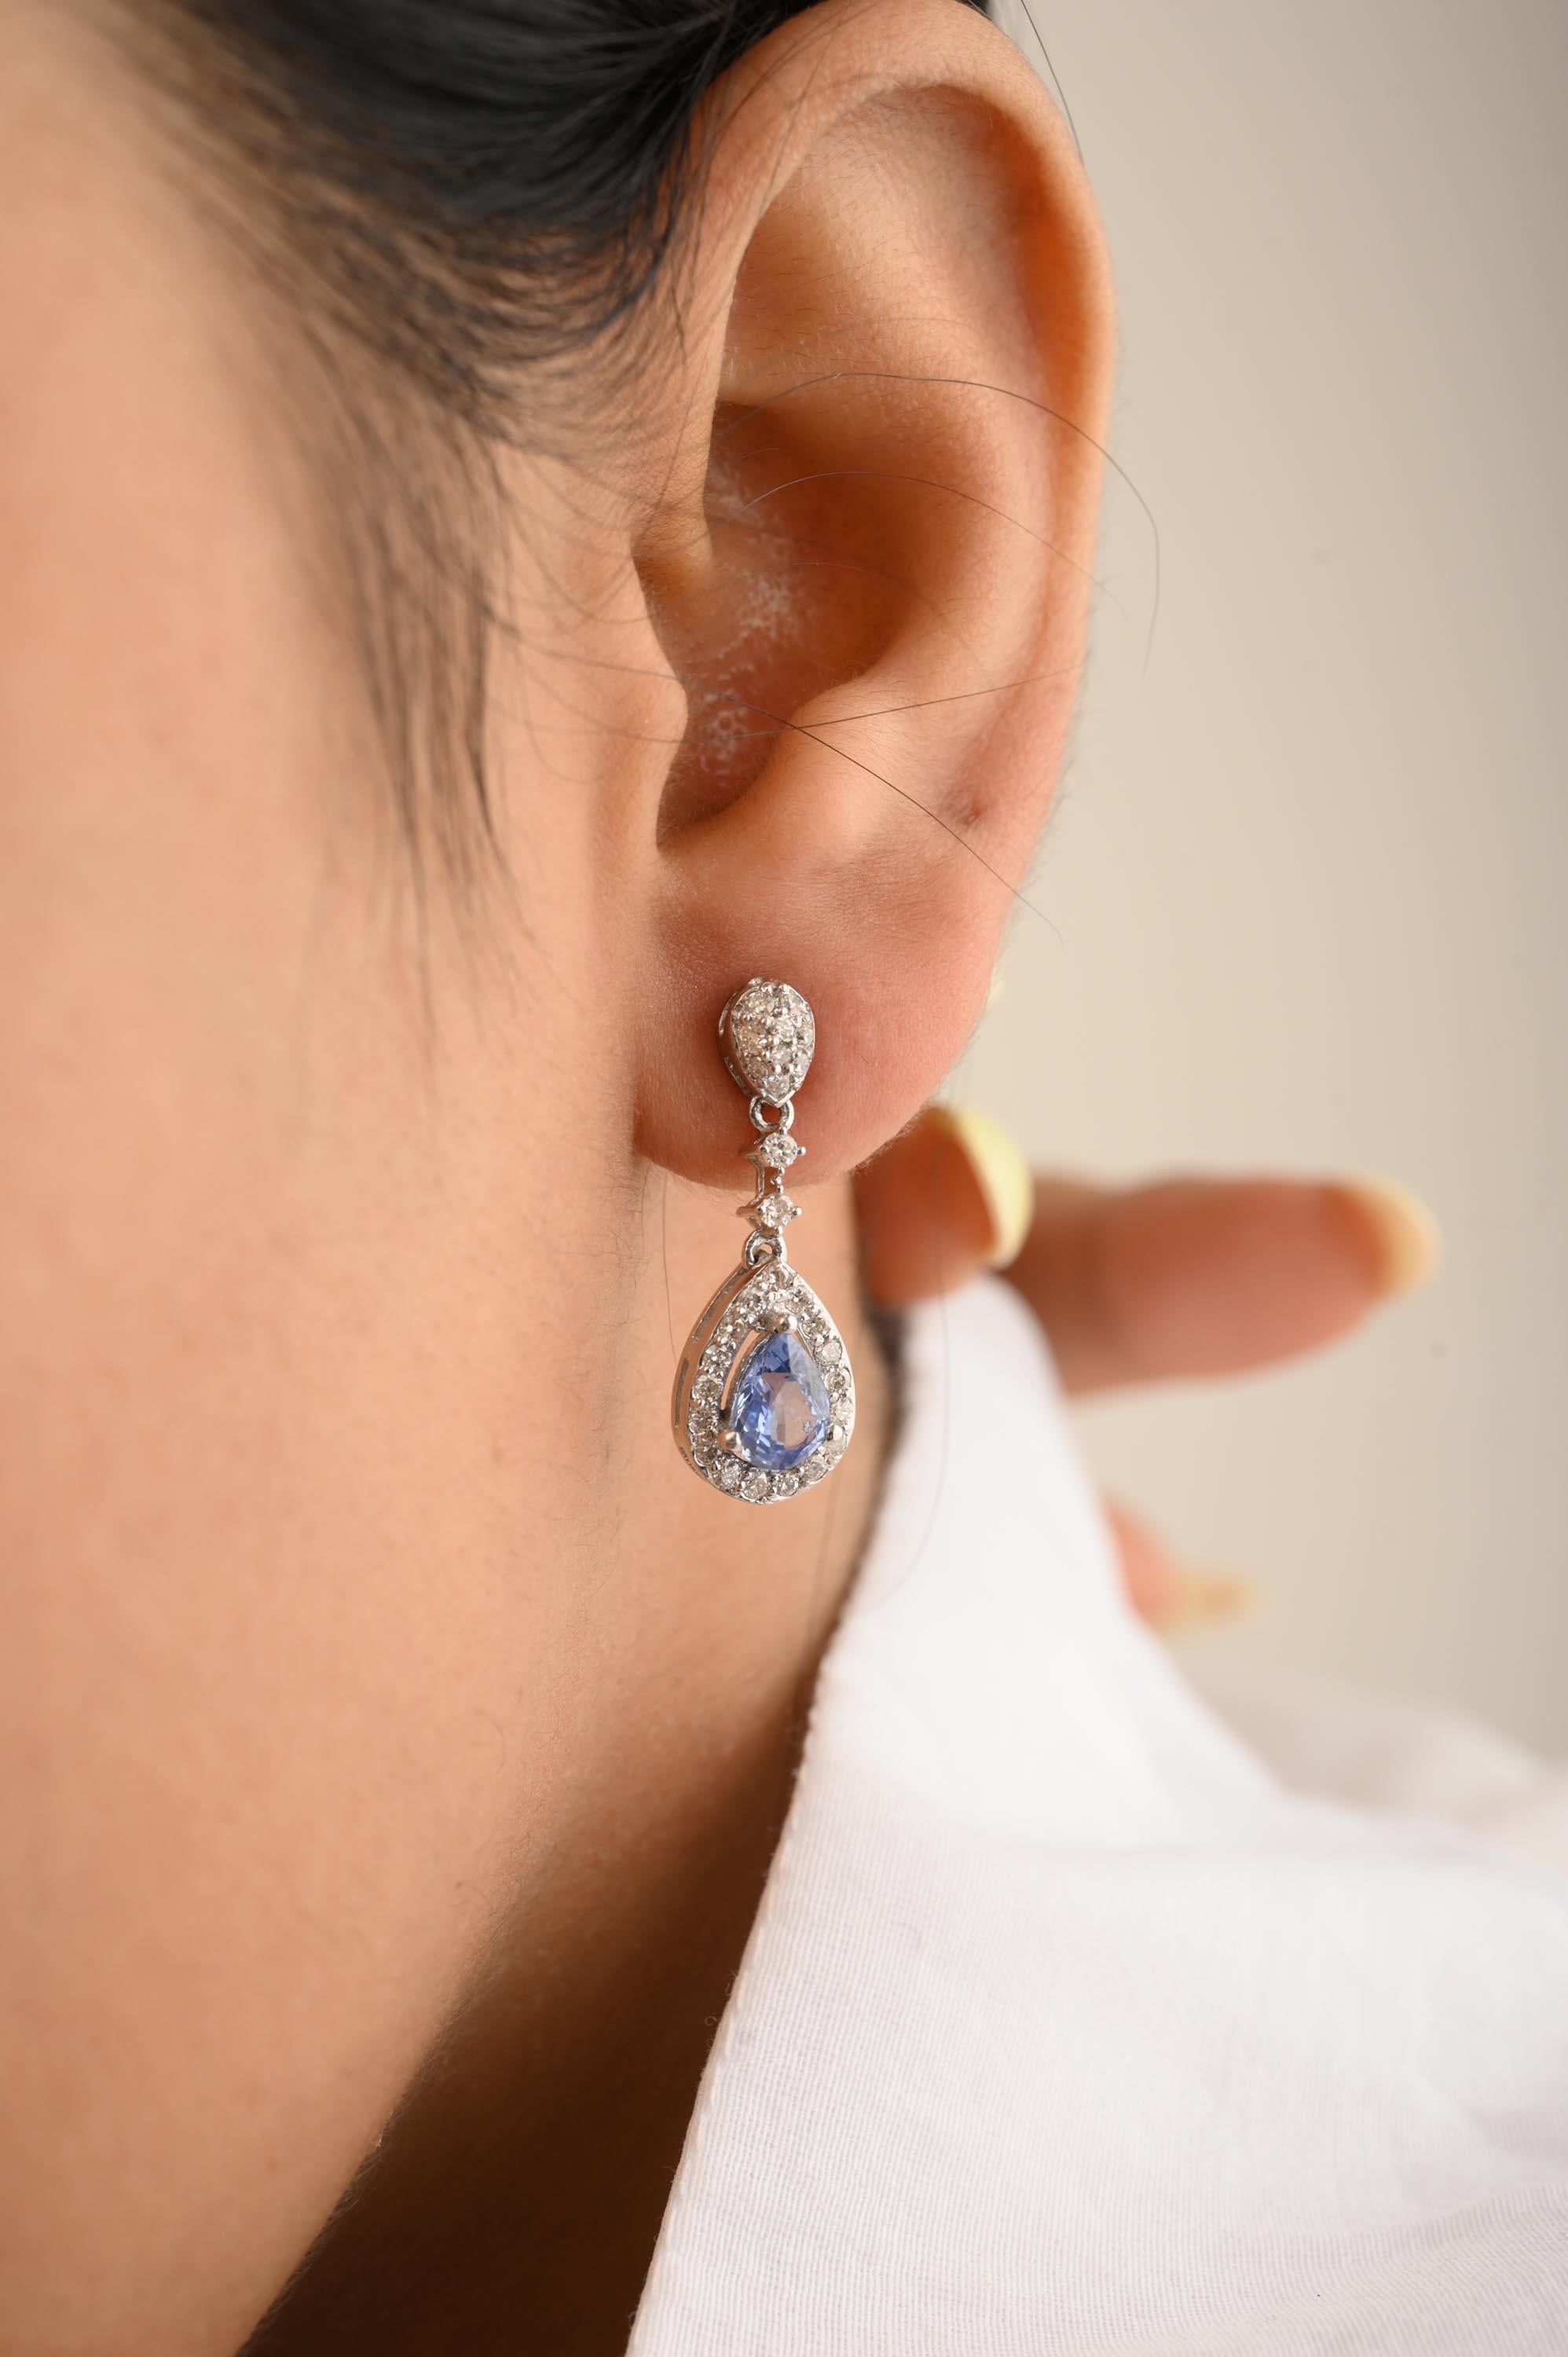 Genuine Blue Sapphire and Diamond Wedding Earrings in 14K Gold to make a statement with your look. You shall need stud earrings to make a statement with your look. These earrings create a sparkling, luxurious look featuring pear cut